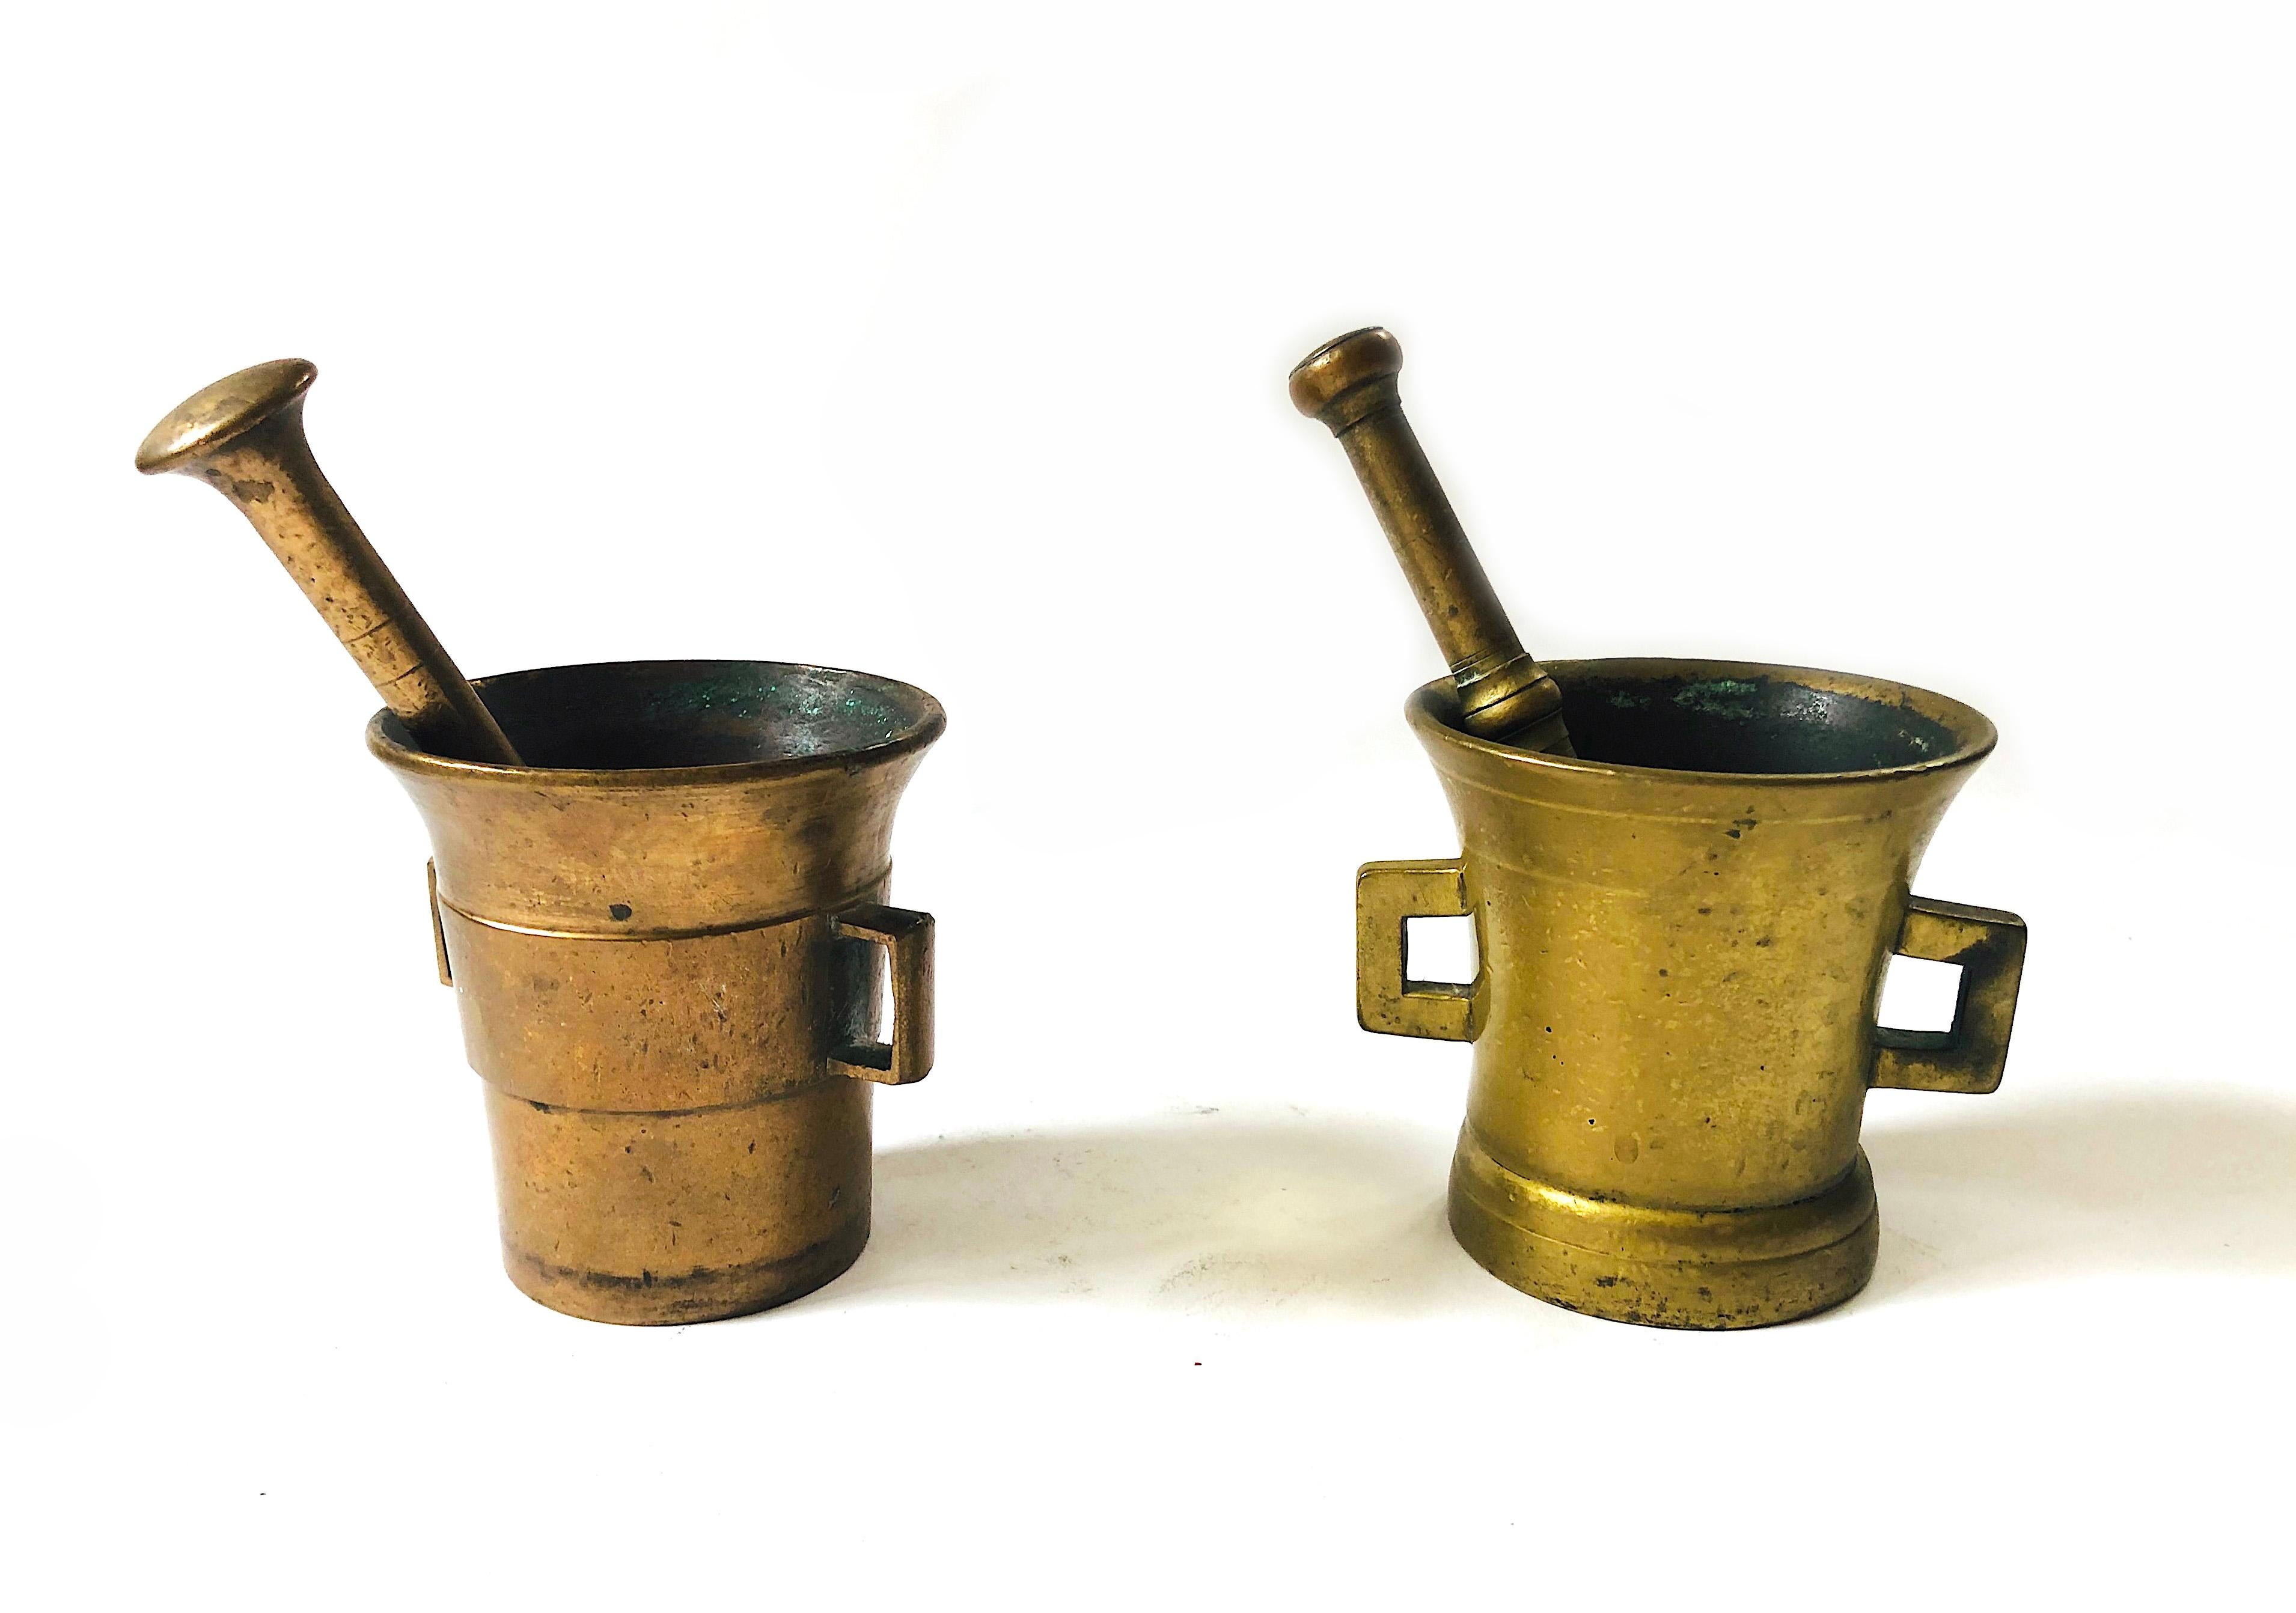 Classical Roman Small Antique 1900s Solid Brass Apothecary Mortars and Pestles - Set of 2 For Sale